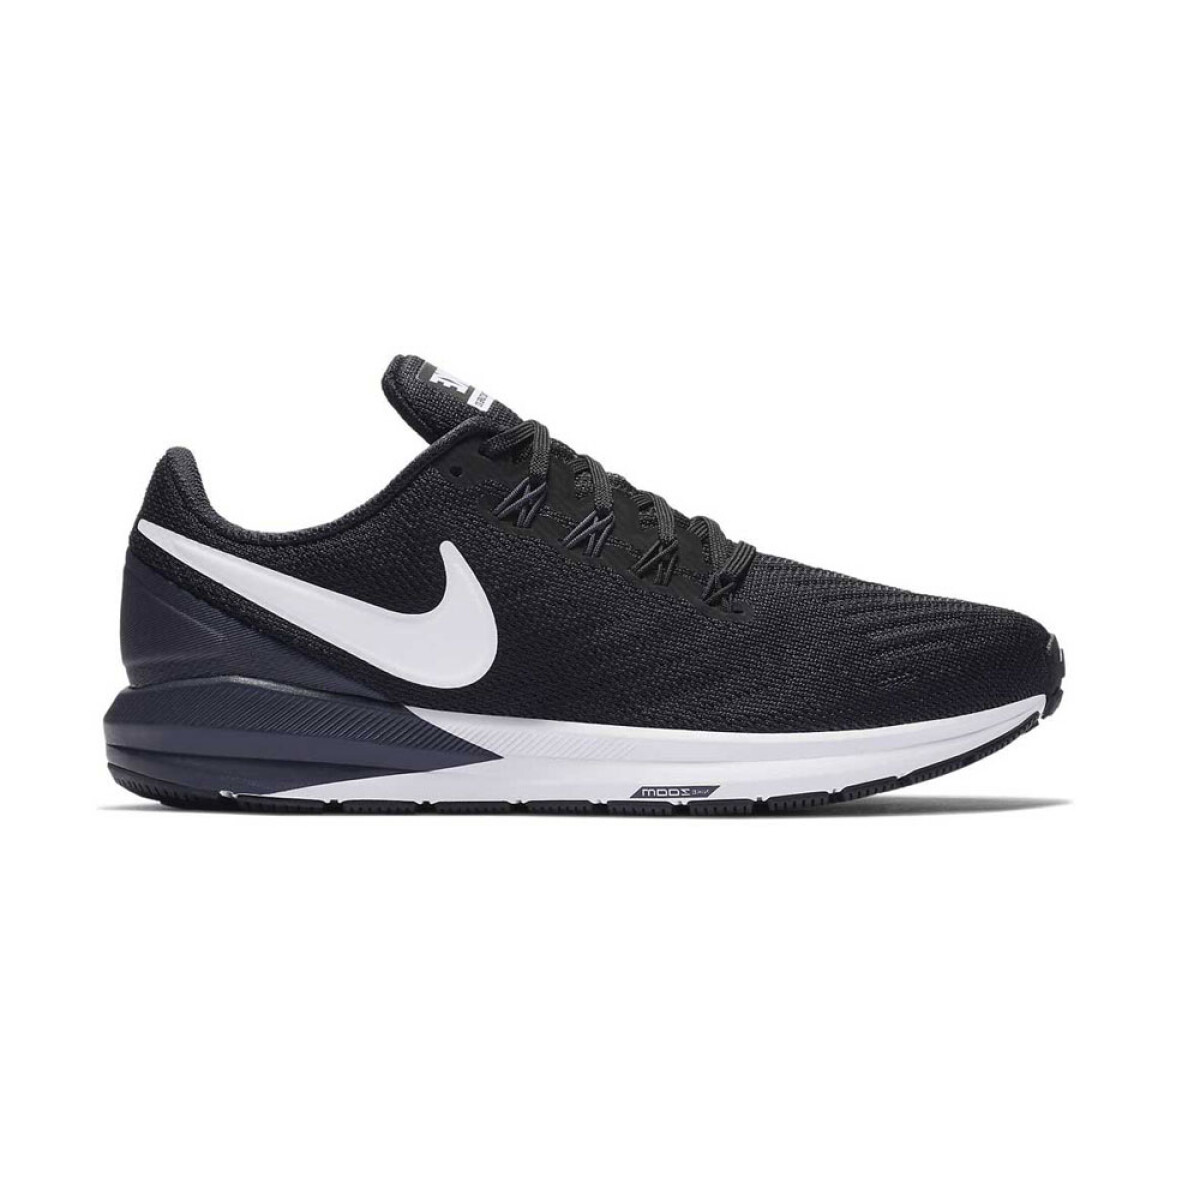 NIKE AIR ZOOM STRUCTURE 22 - Black 